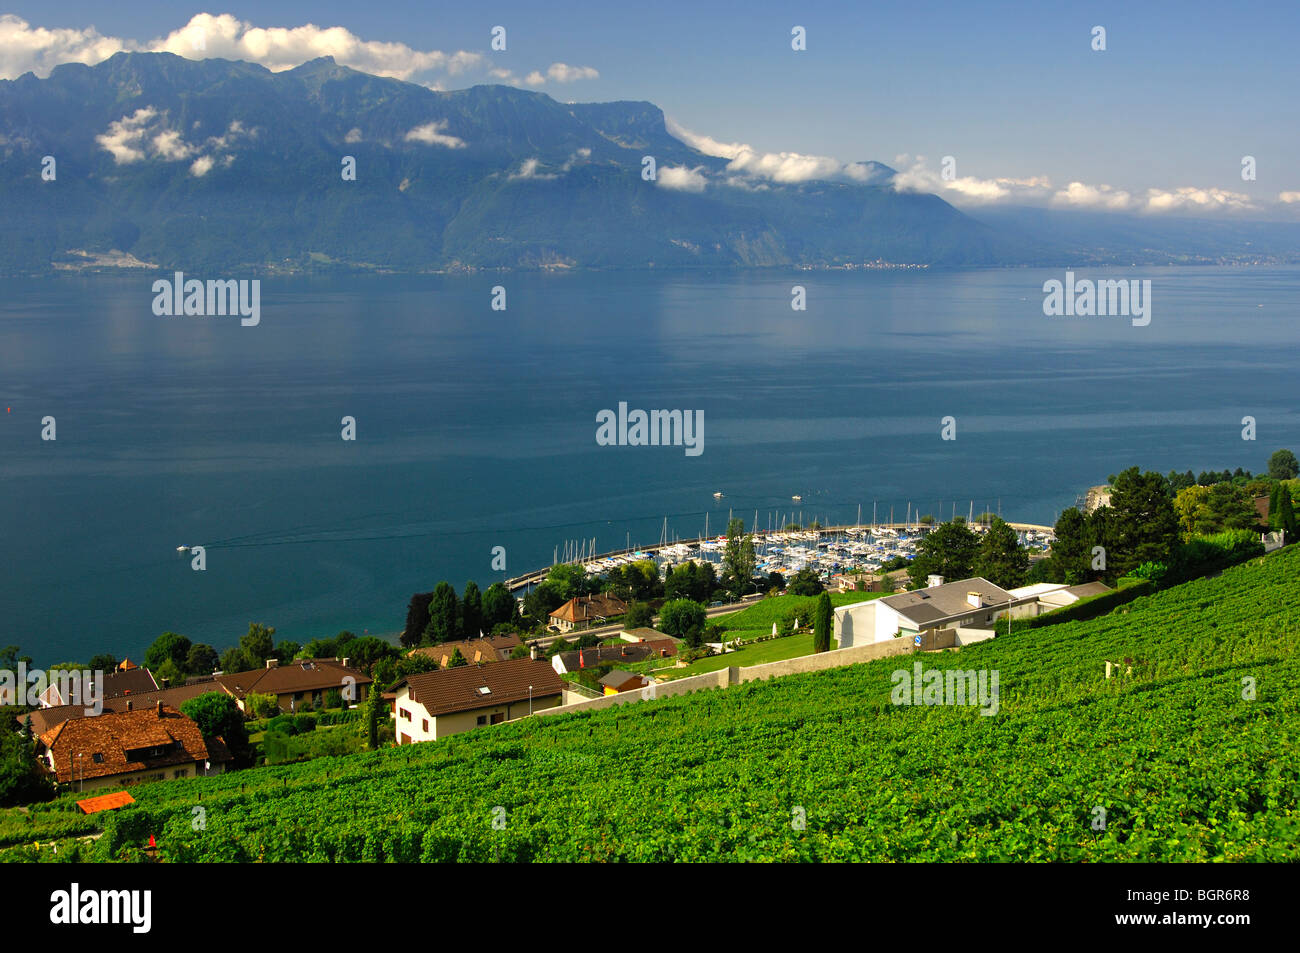 Corseaux at Lake Leman between vineyards and the French Alps, UNESCO World Heritage site Lavaux, Vaud, Switzerland Stock Photo